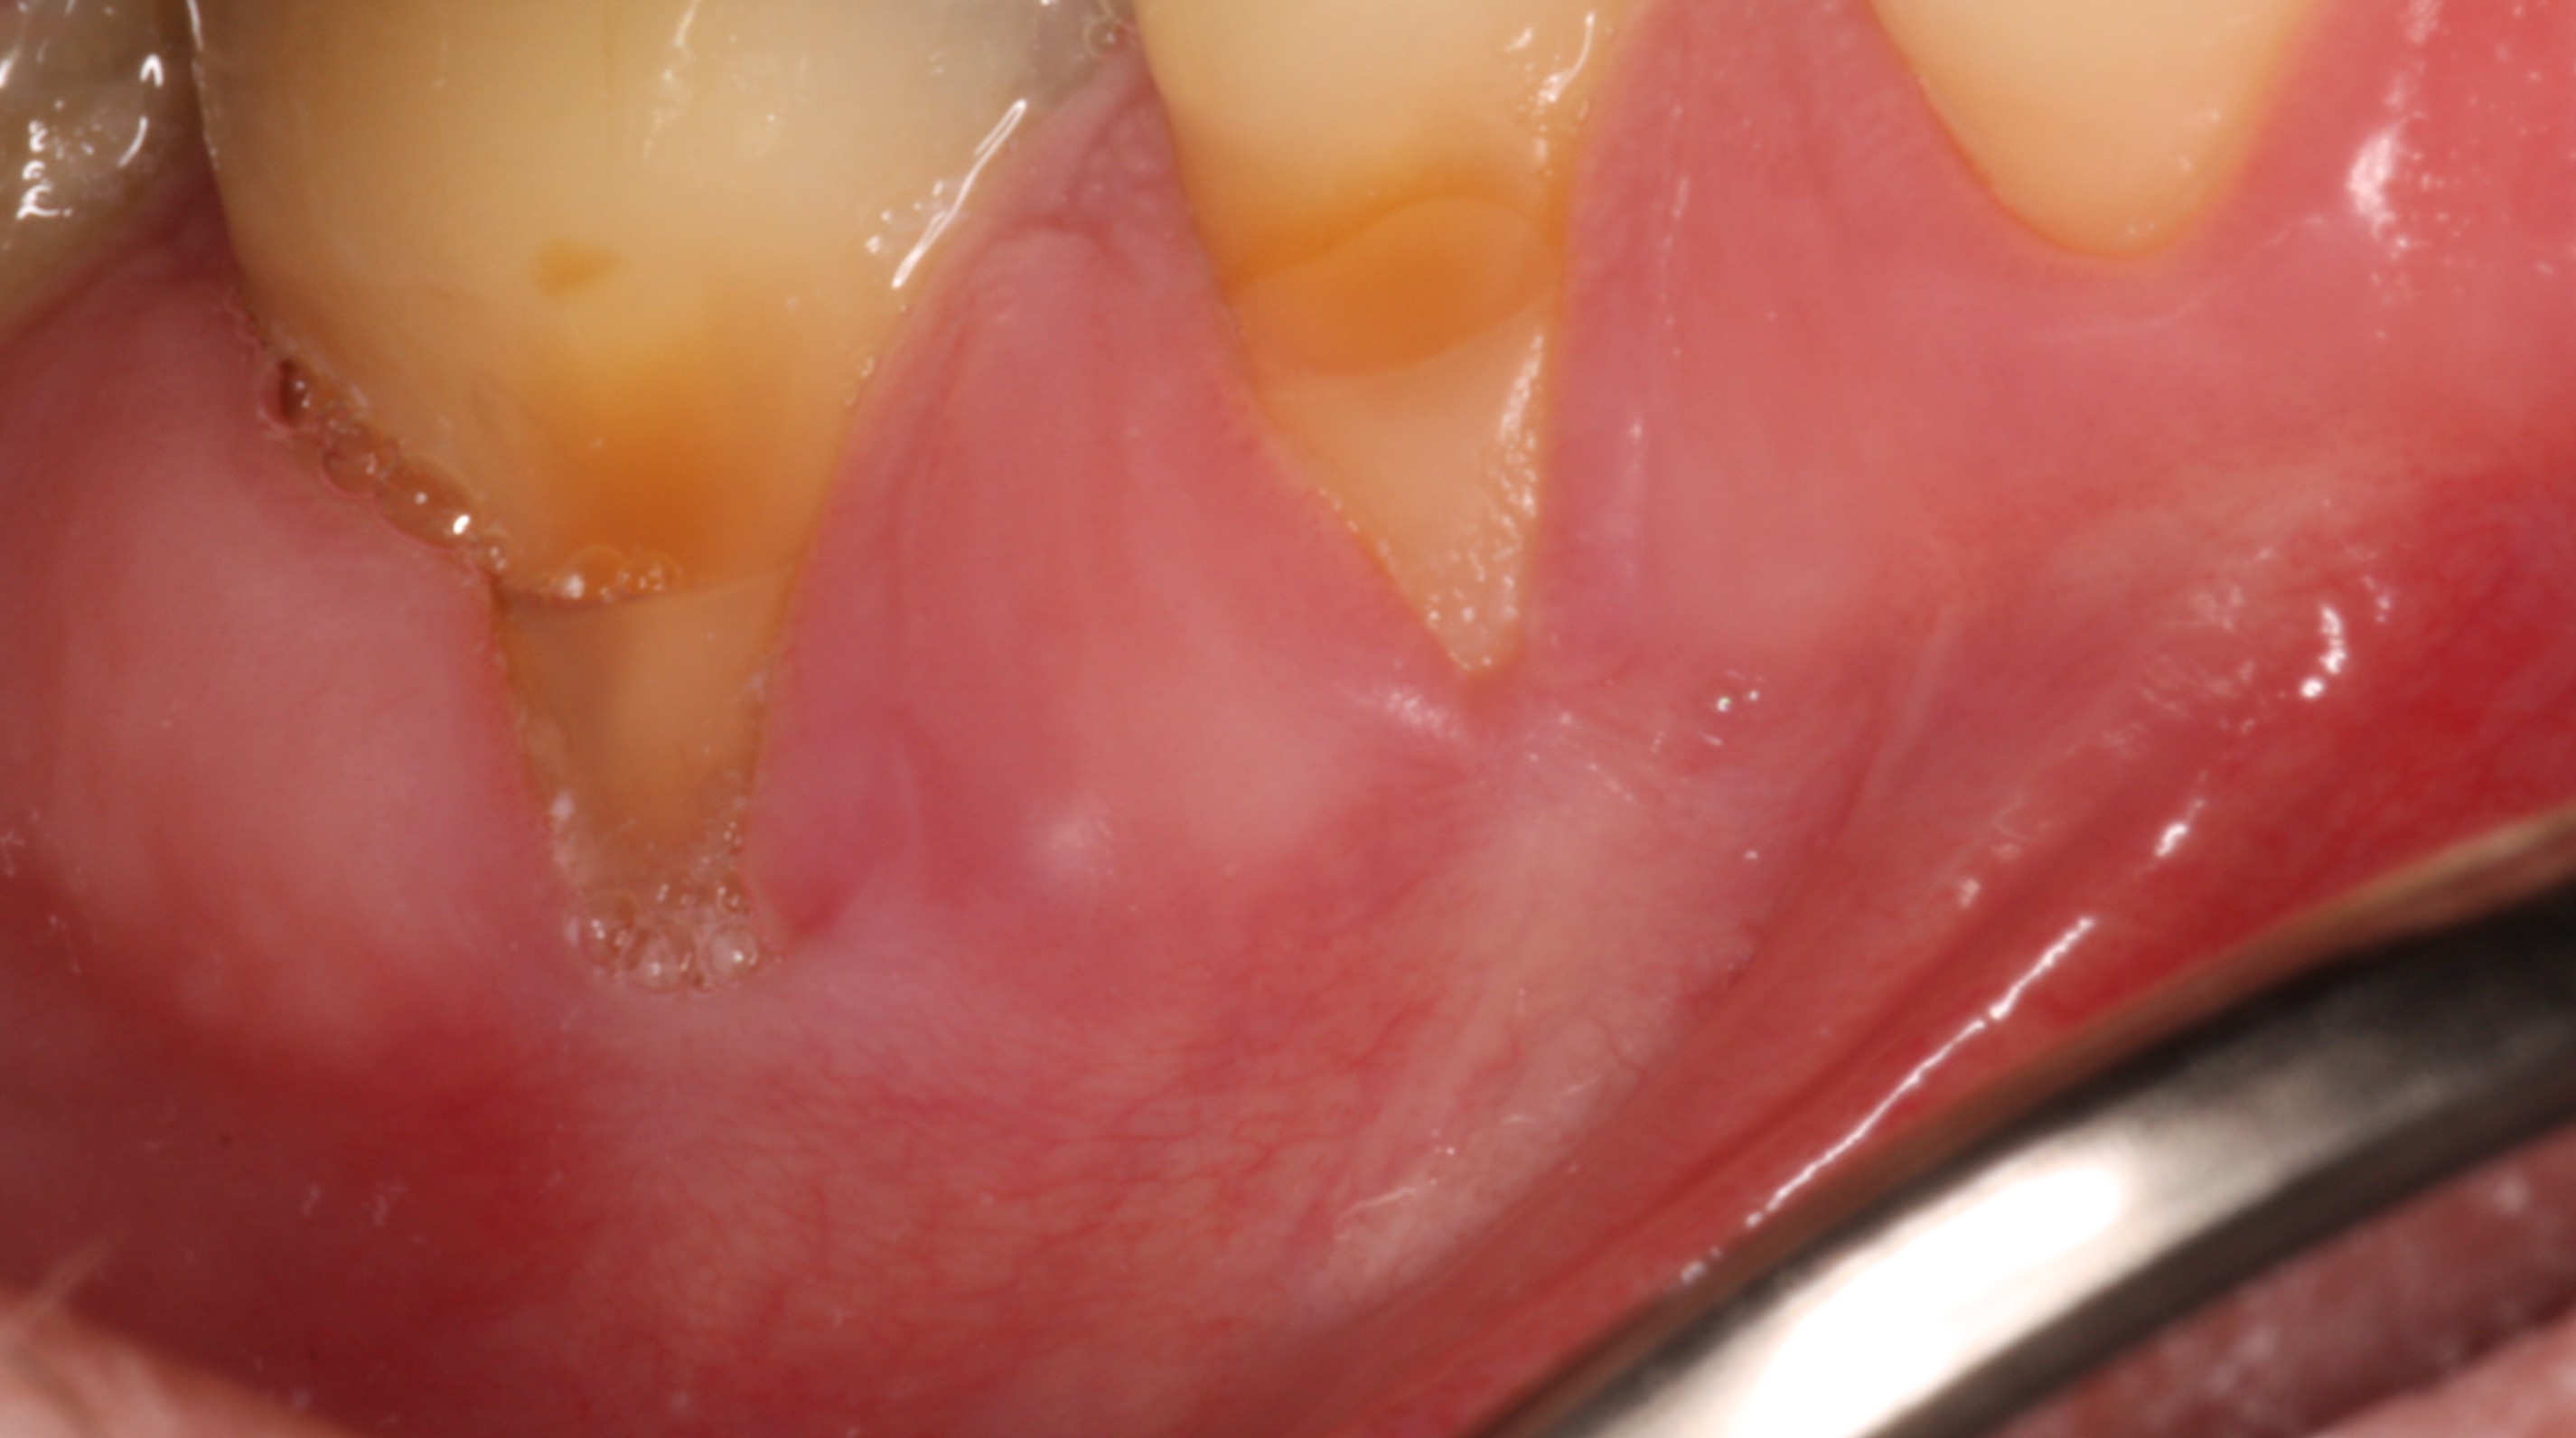 Receding gums before surgical treatment.